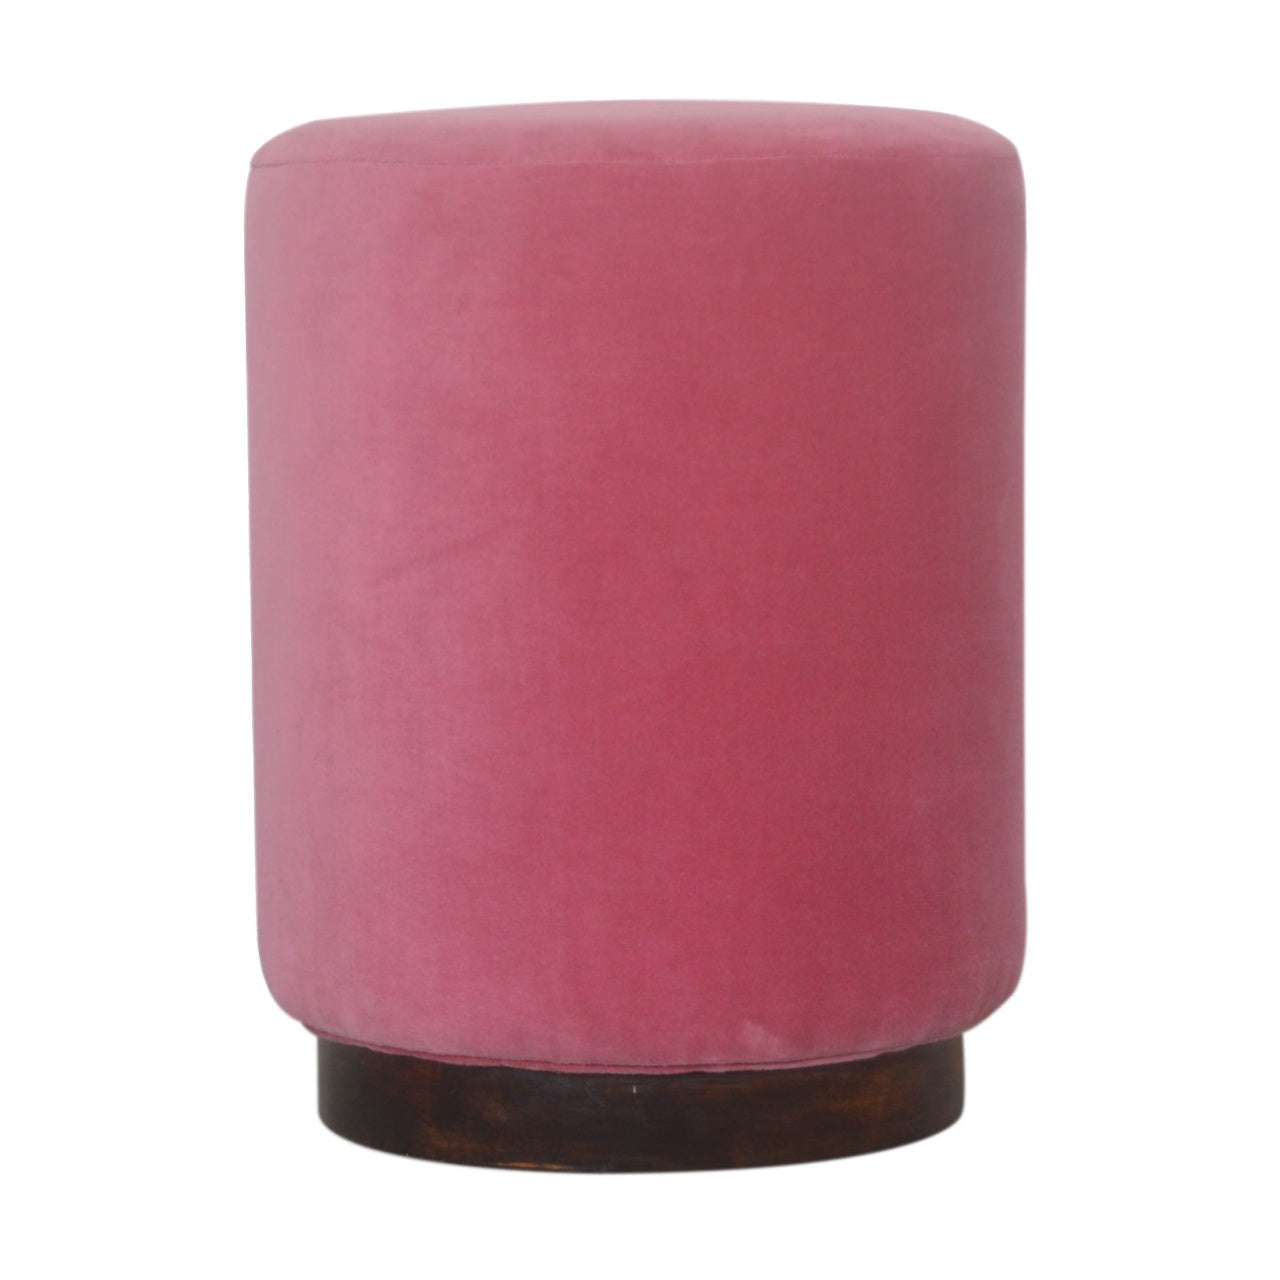 View Pink Velvet Footstool with Wooden Base information